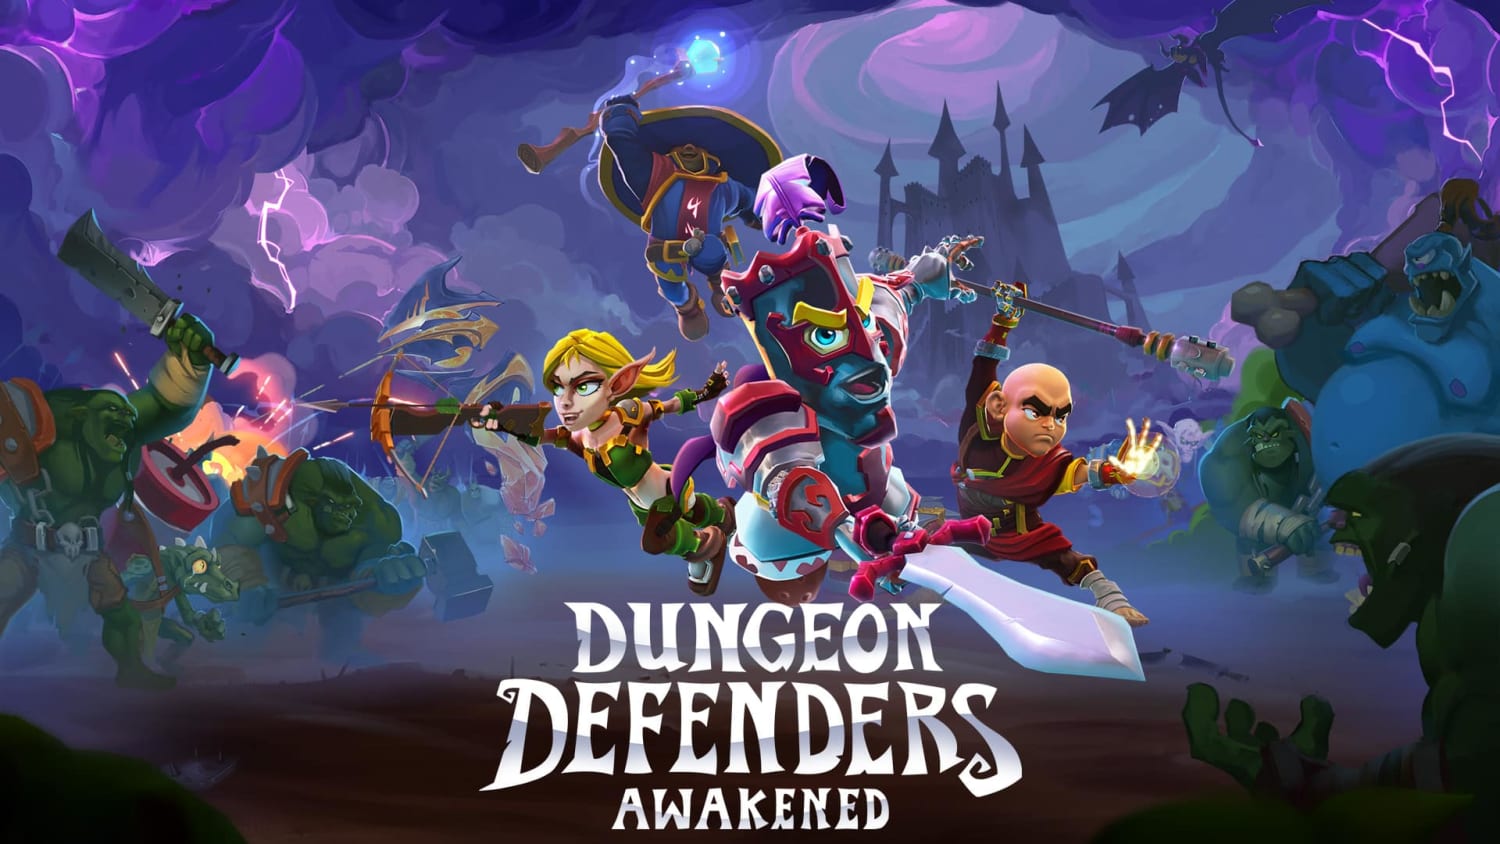 Dungeon Defenders: Awakened at PAX South 2020